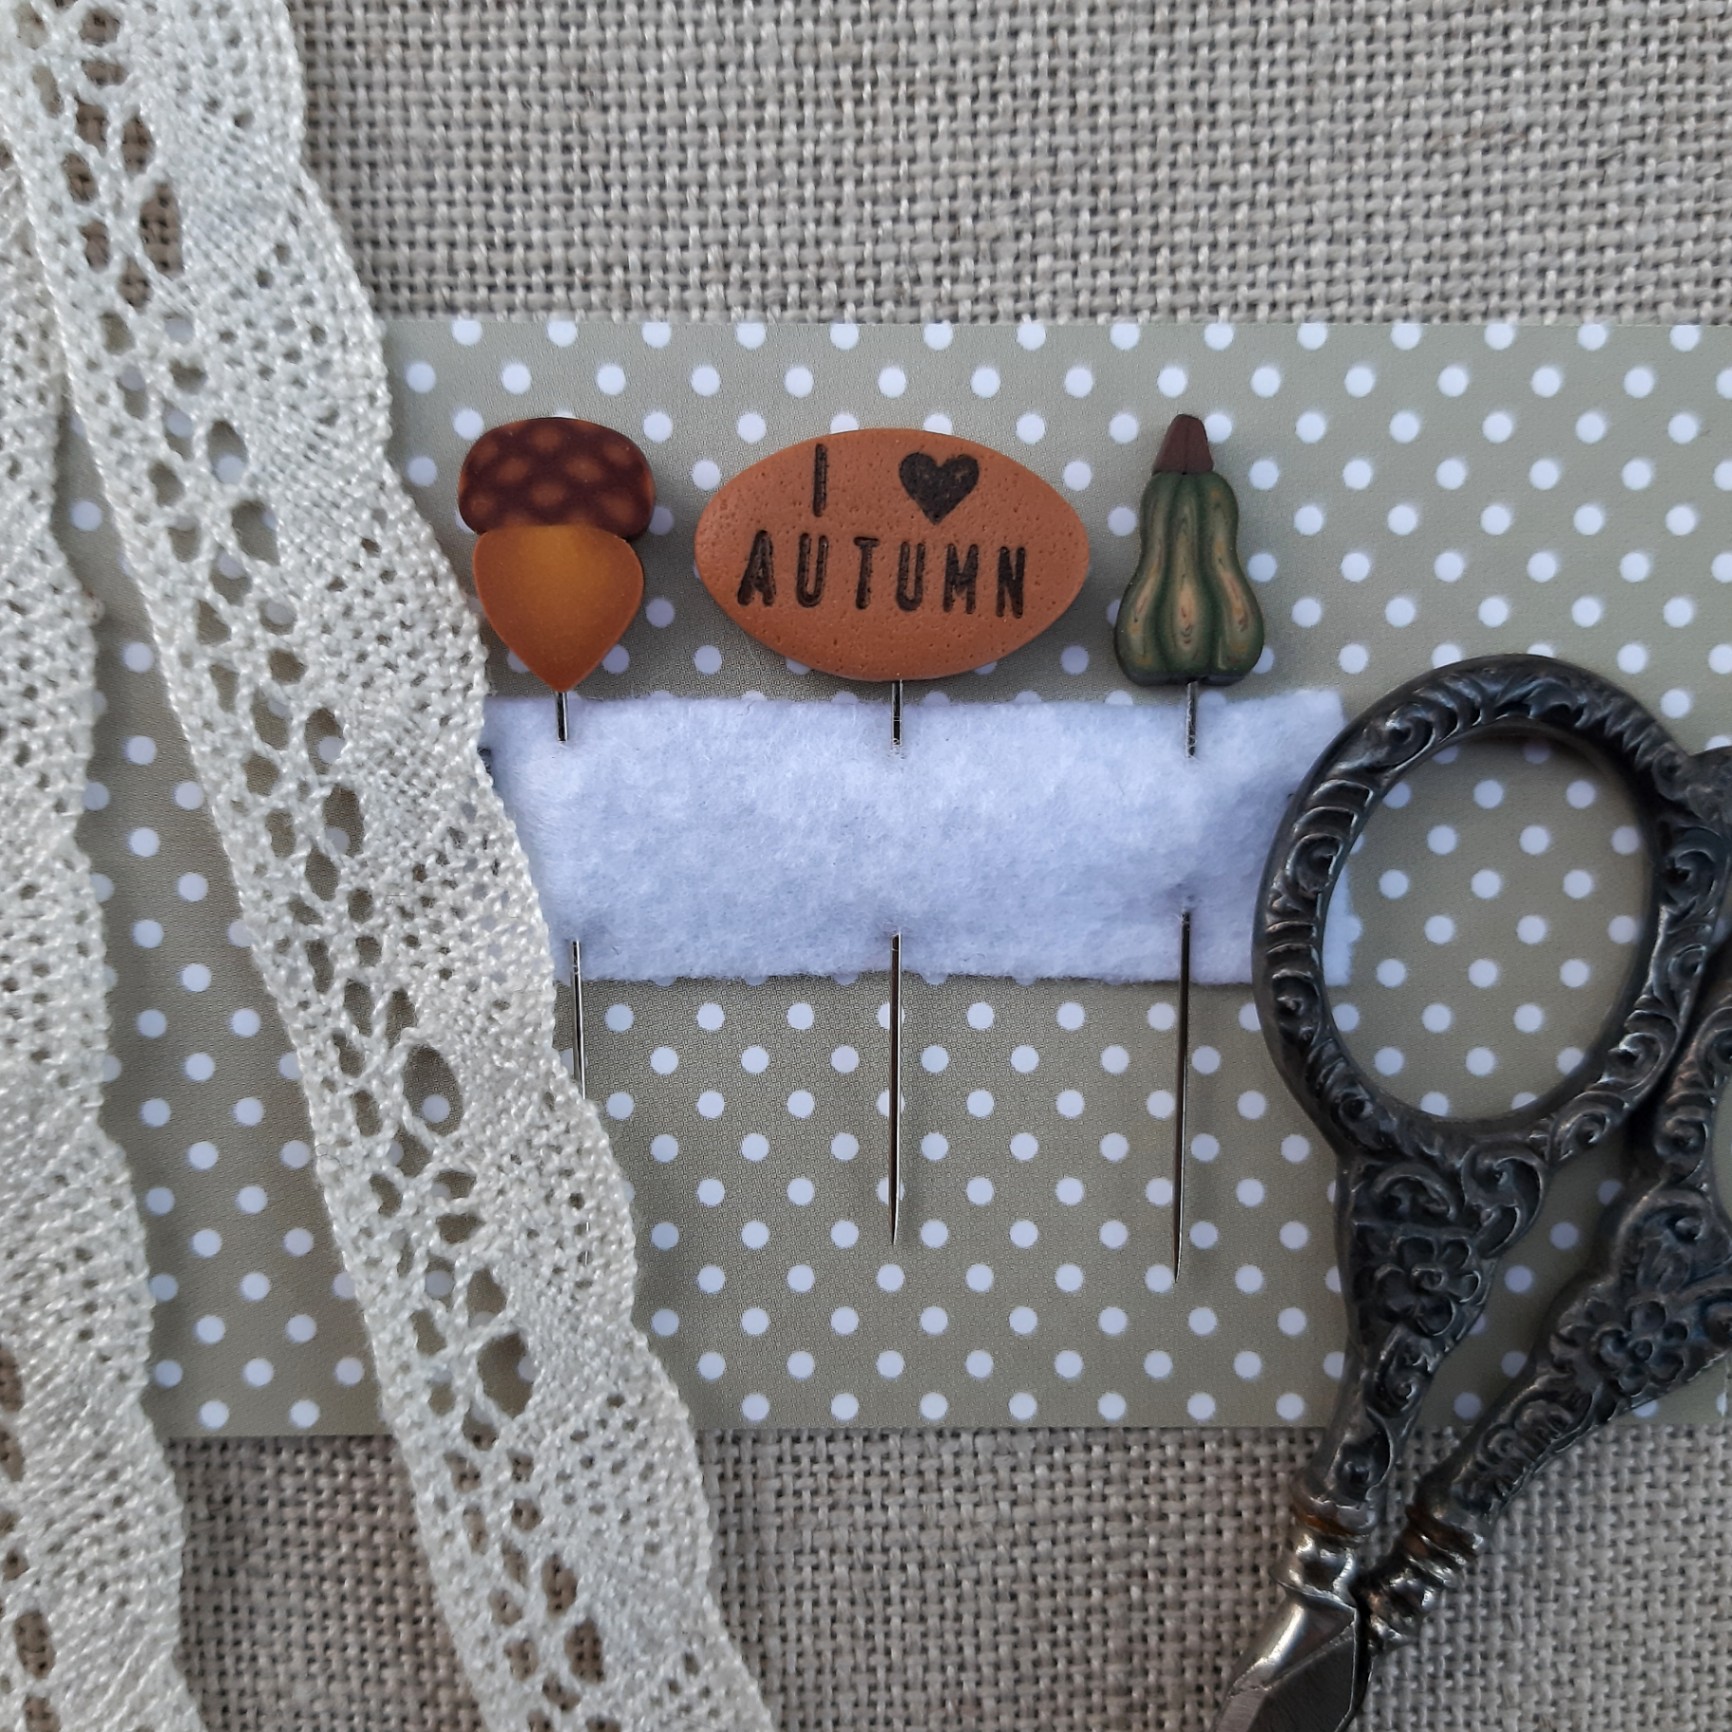  Pins : I love Autumn by Puntini Puntini 